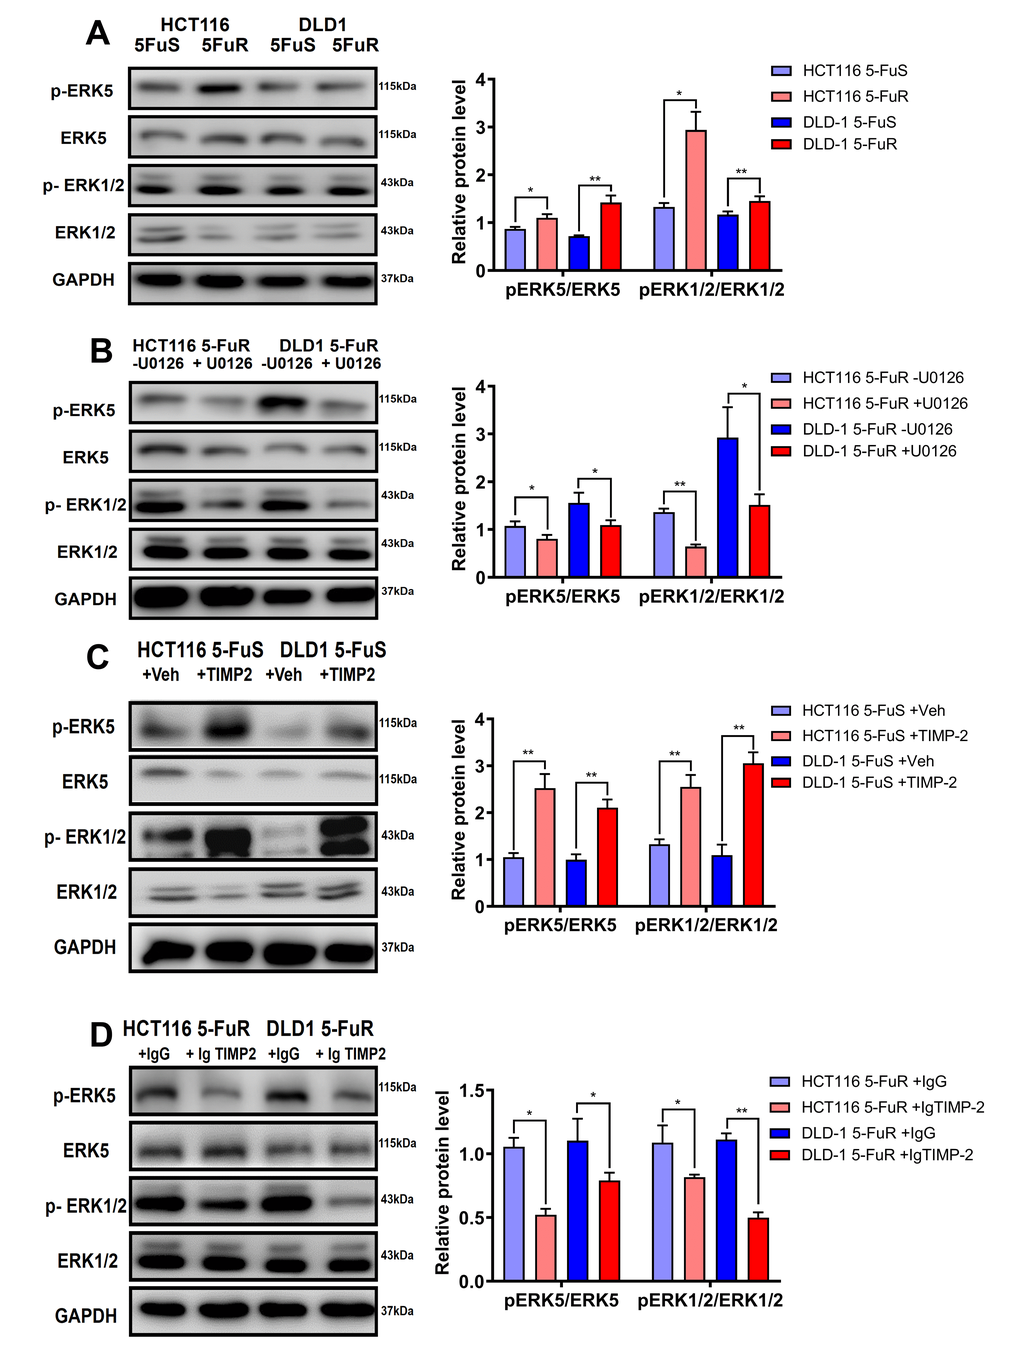 TIMP-2 sustains the activation of ERK/MAPK in CRC cells. (A) Immunoblotting of phosphorylated ERK1/2 and ERK5 in DLD-1 5-FuS cells and DLD-1 5-FuR cells, HCT116 5-FuS cells and HCT116 5-FuR cells. (B) Immunoblotting of phosphorylated ERK1/2 and ERK5 in DLD-1 5-FuR cells and HCT116 5-FuR cells cultured with 5 μM of U0126 for 2 days, which down-regulates ERK/MAPK signaling. (C) Immunoblotting of phosphorylated ERK1/2 and ERK5 in DLD-1 5-FuS cells and HCT116 5-FuS cells cultured with 10 ng/mL of recombinant TIMP-2 for 6 h. (D) Immunoblotting of phosphorylated ERK1/2 and ERK5 in DLD-1 5-FuR cells and HCT116 5-FuR cells cultured with control IgG or 5 μg/mL of TIMP-2 neutralizing antibody for 6 h. Band intensities of western blotting for p-ERK5/ ERK5 and p-ERK1/2/ERK1/2 were analyzed. *p **p ***p t-test.